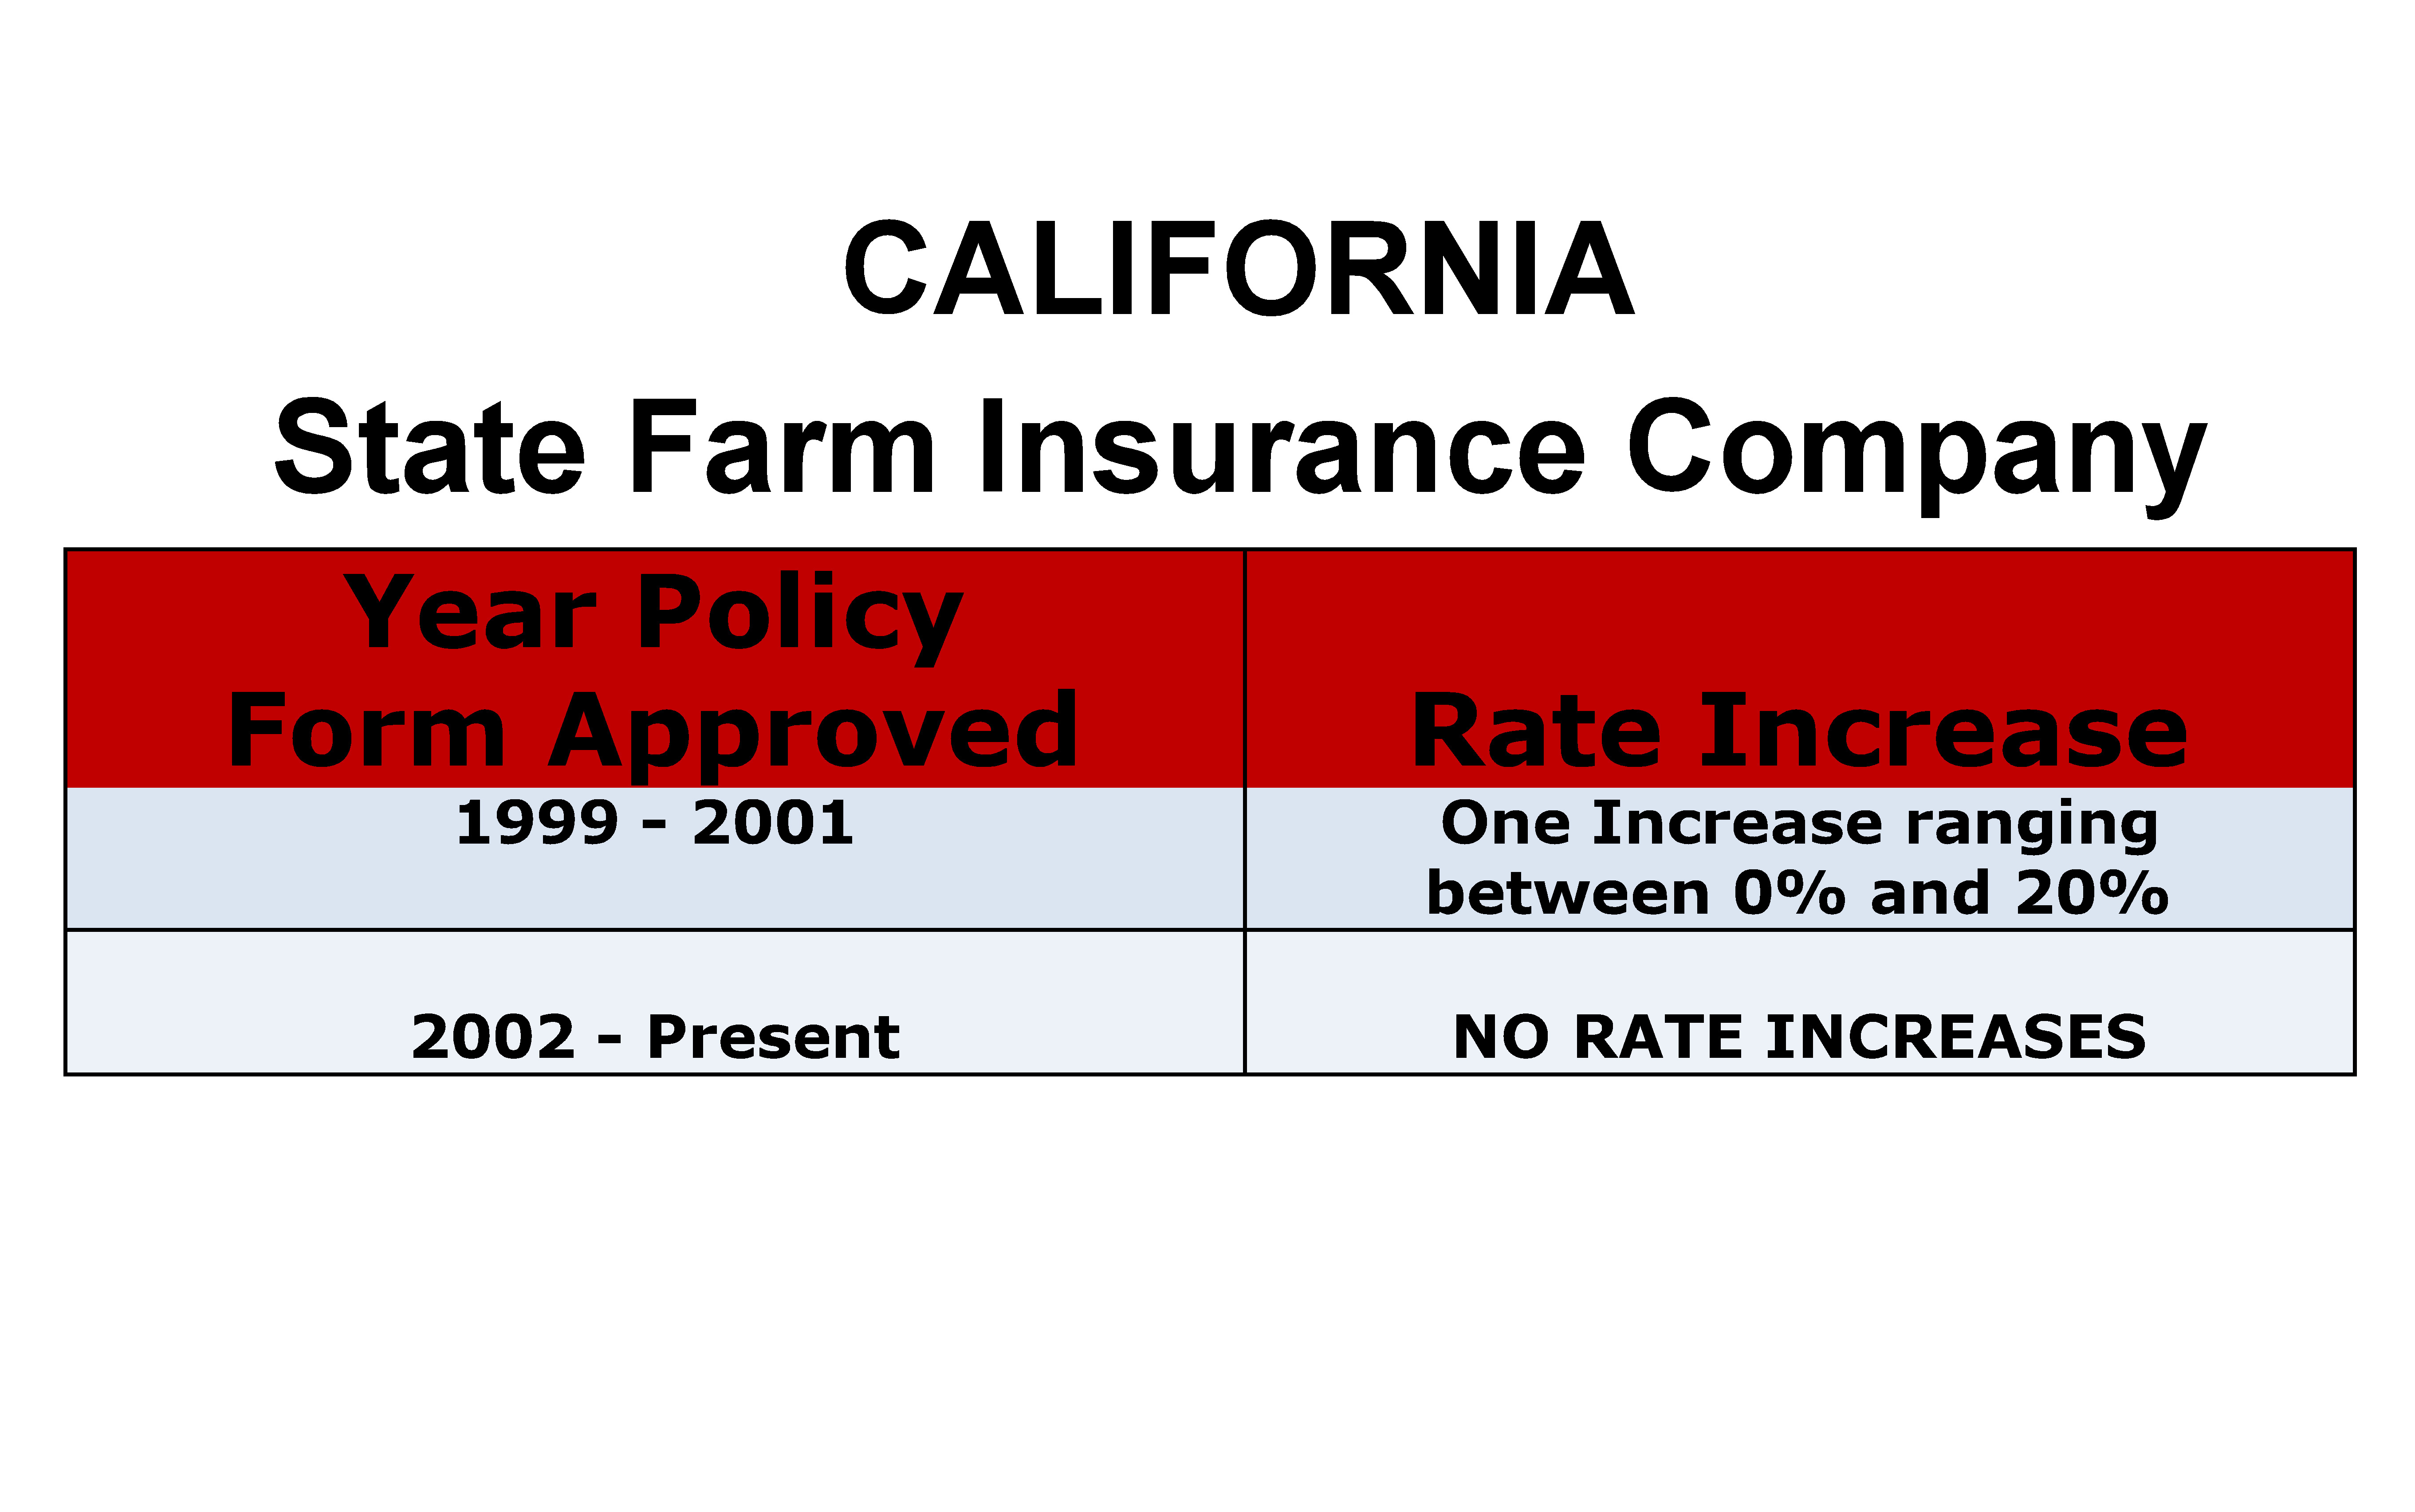 State Farm's Rate Increase History in California - LTCFacts.org